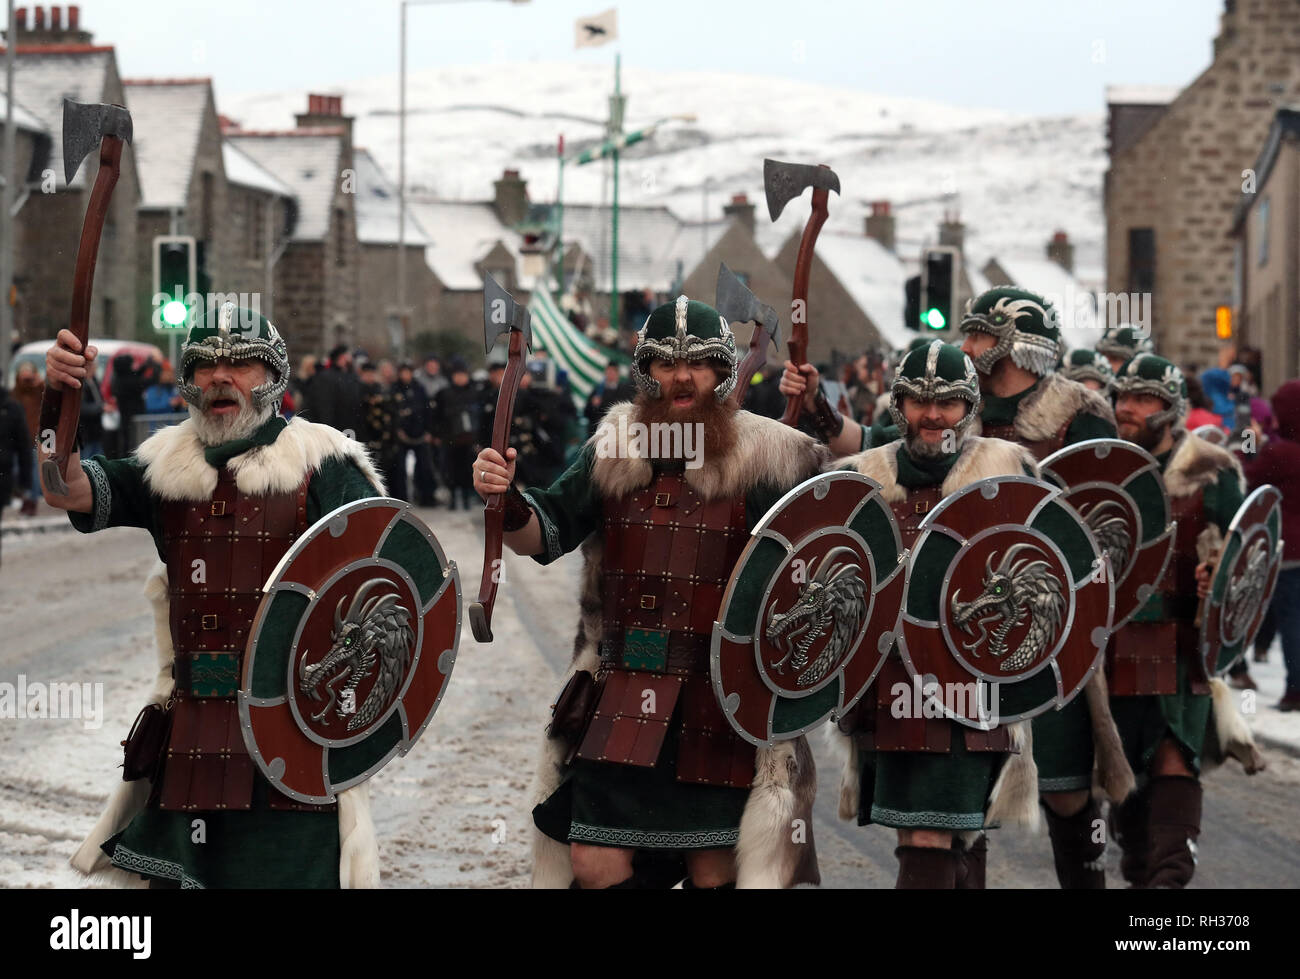 Members of the Jarl Squad march through Lerwick as snow falls on the Shetland Isles during the Up Helly Aa Viking festival. Originating in the 1880s, the festival celebrates Shetland's Norse heritage. PRESS ASSOCIATION Photo. Picture date: Tuesday January 29, 2019. Stock Photo